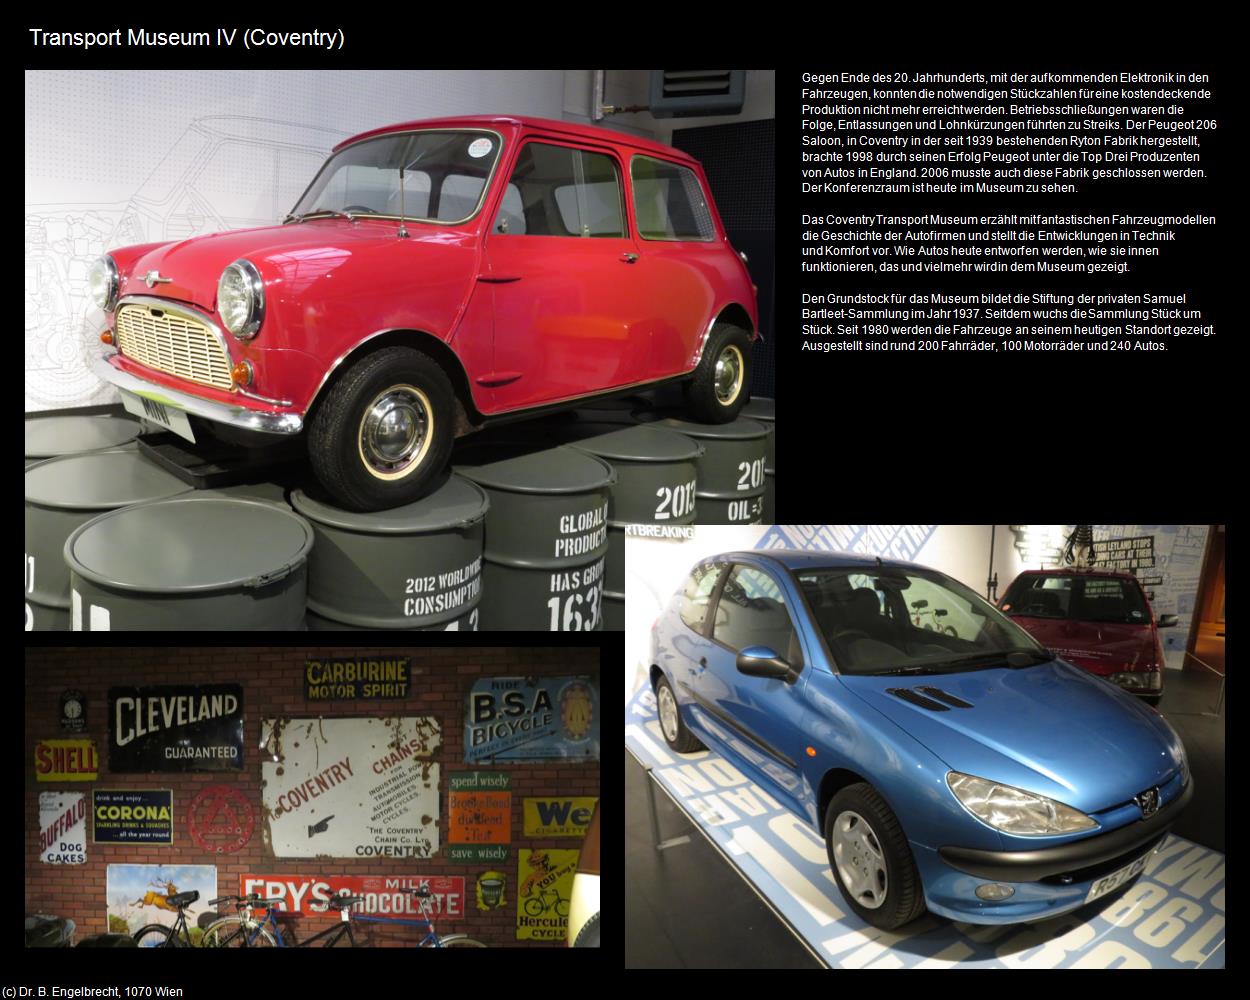 Transport Museum IV (Coventry, England      ) in Kulturatlas-ENGLAND und WALES